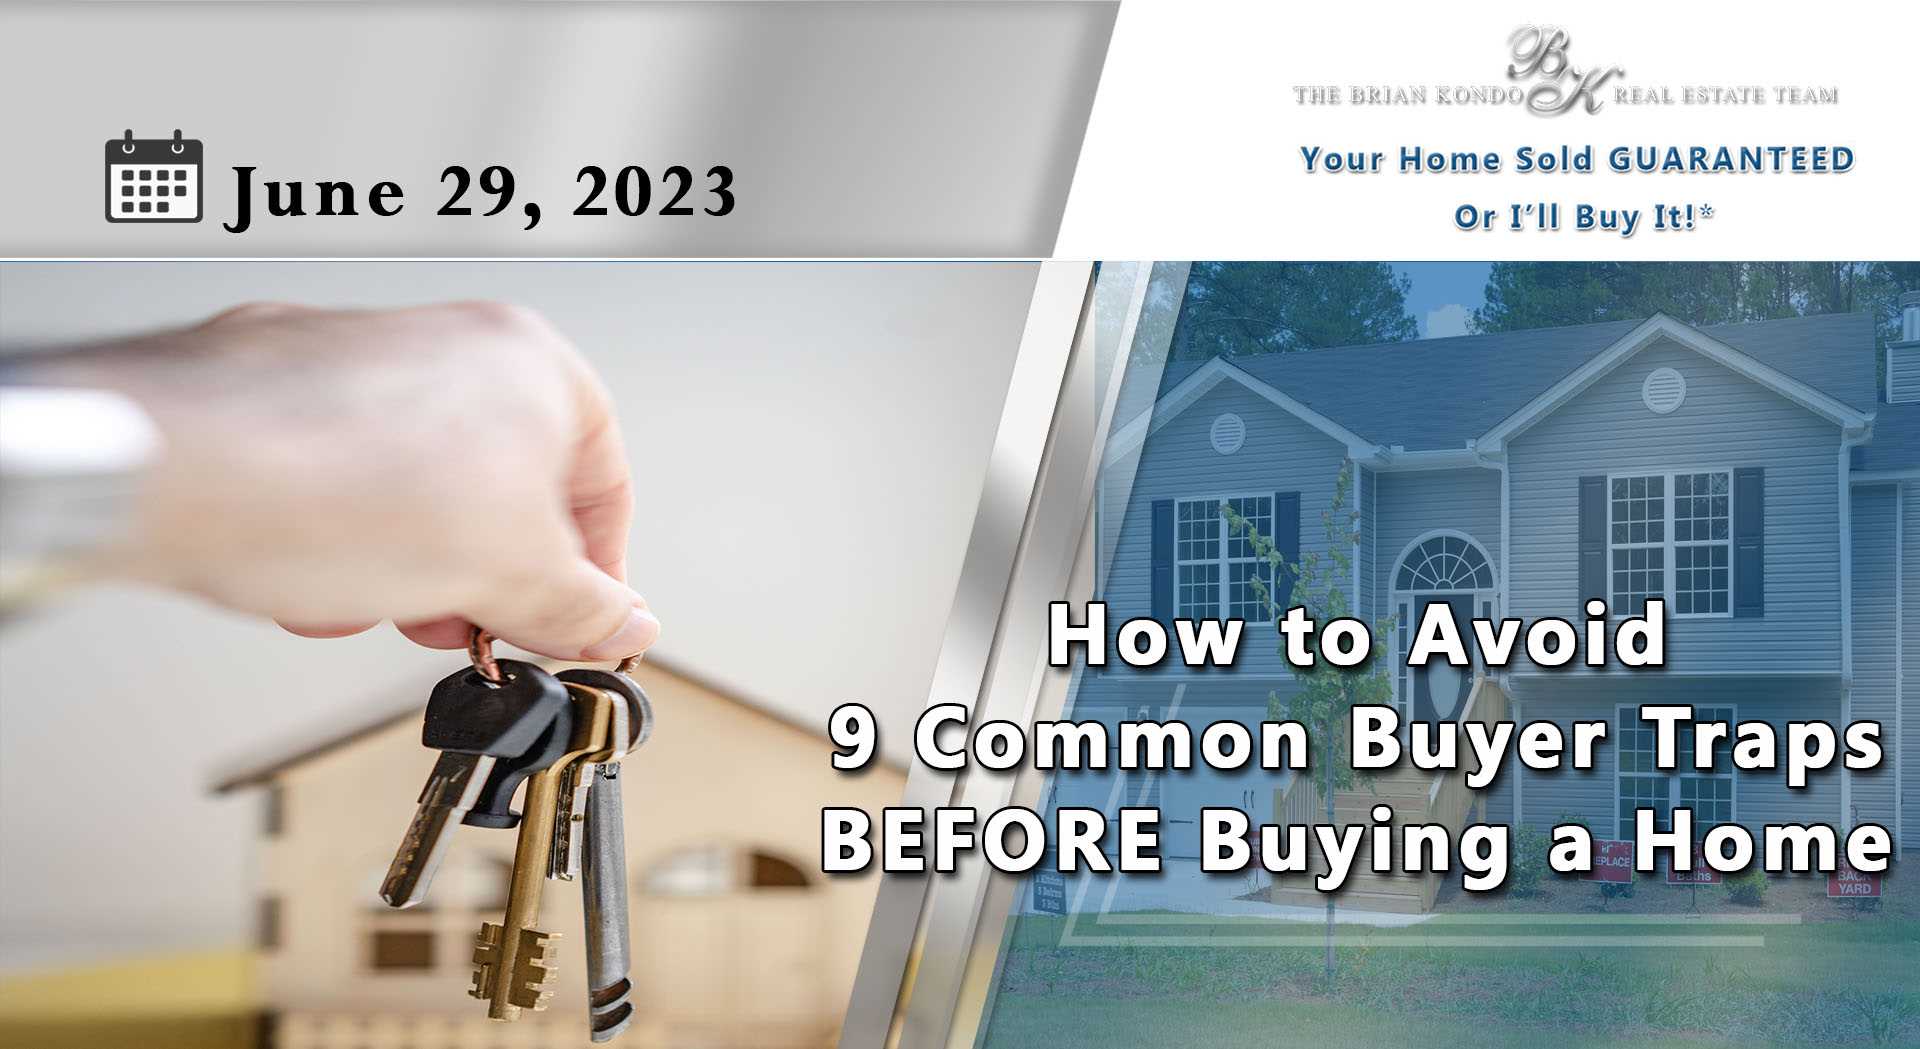 How to Avoid 9 Common Buyer Traps BEFORE Buying a Home!